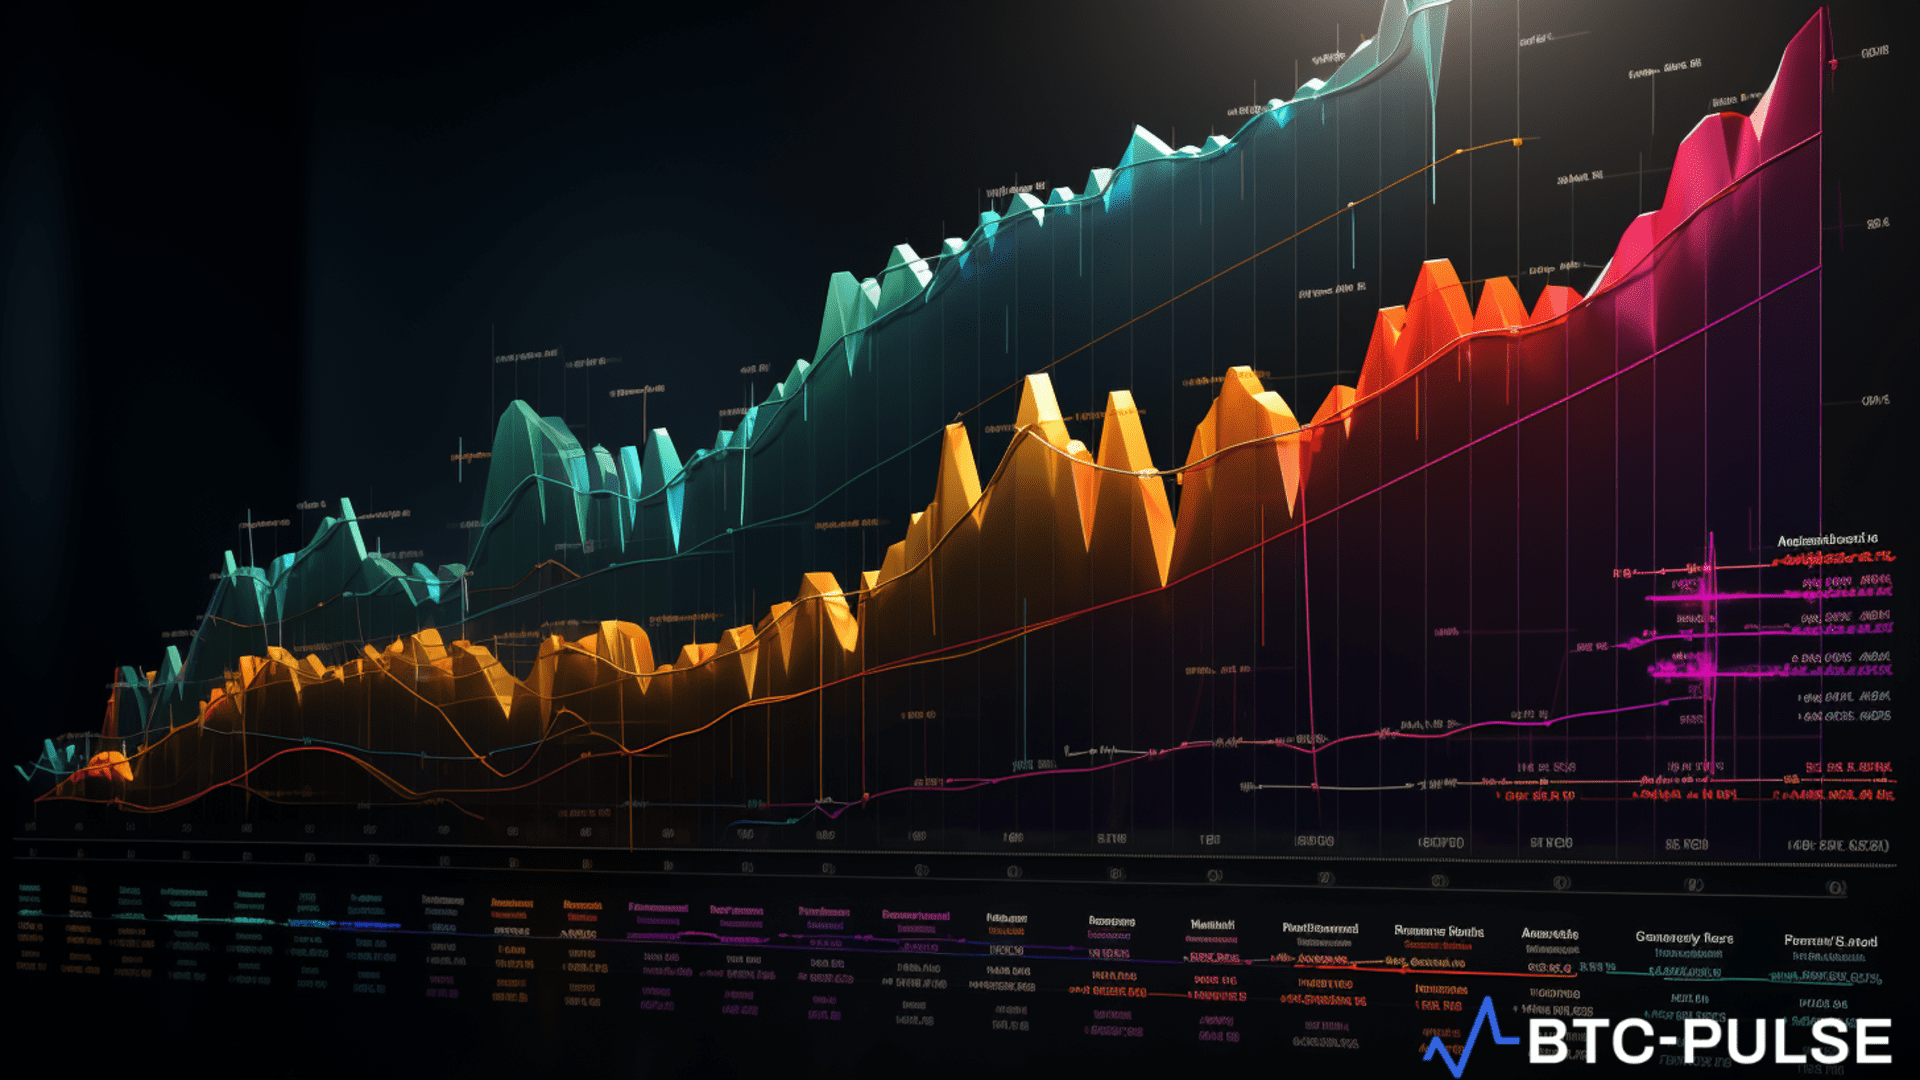 Graph showing the recent surge in AI cryptocurrency token values